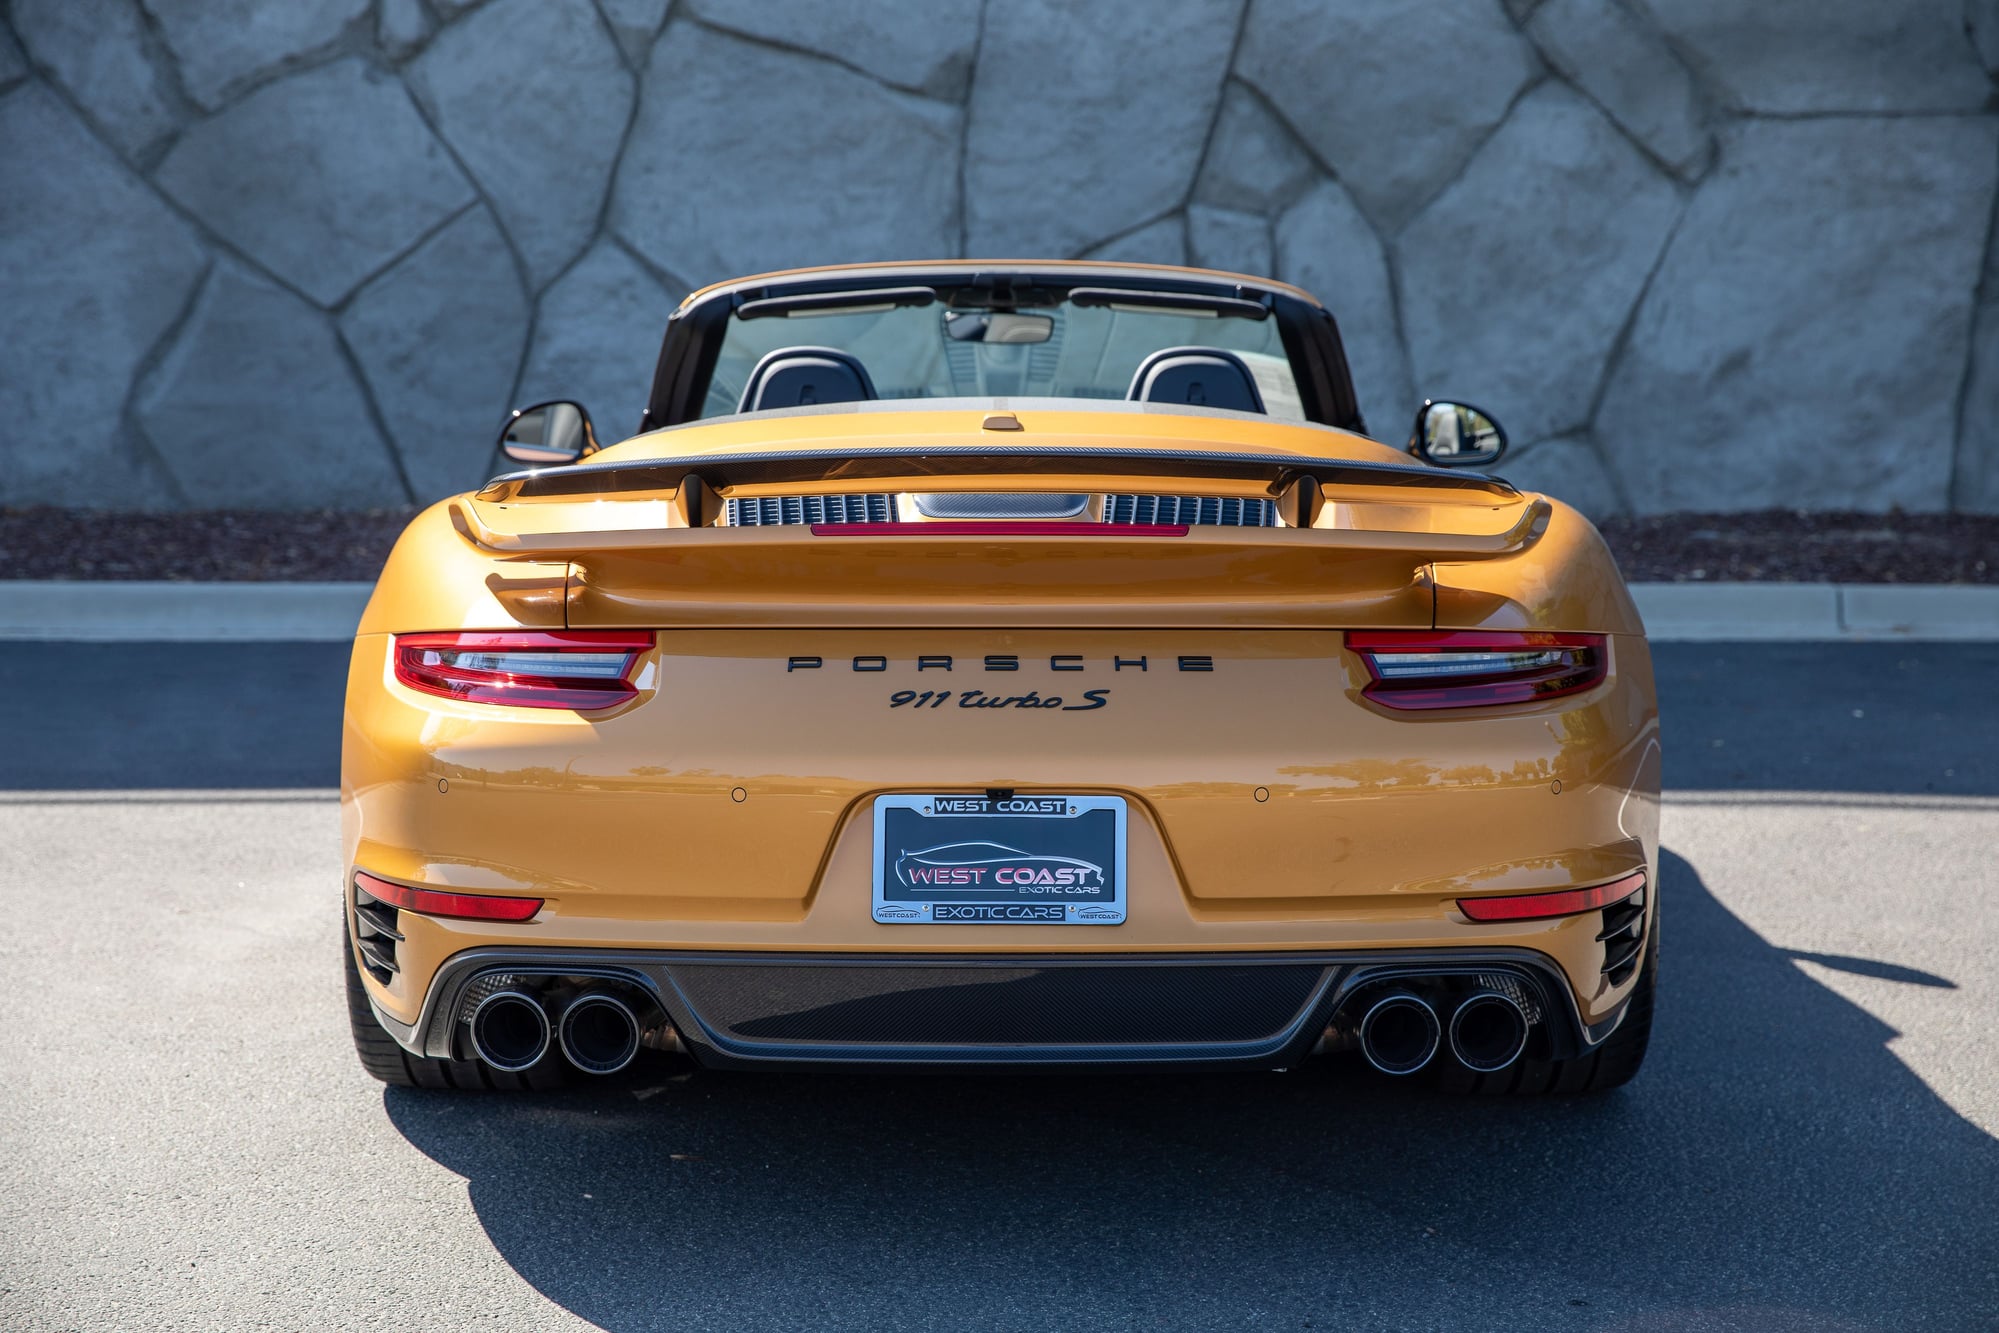 2018 Porsche 911 - 2019 Porsche 911 Turbo S Exclusive Series Cabriolet #189 of 200! - New - VIN WP0CD2A93KS144546 - 28 Miles - 6 cyl - AWD - Automatic - Convertible - Gold - Murrieta, CA 92562, United States